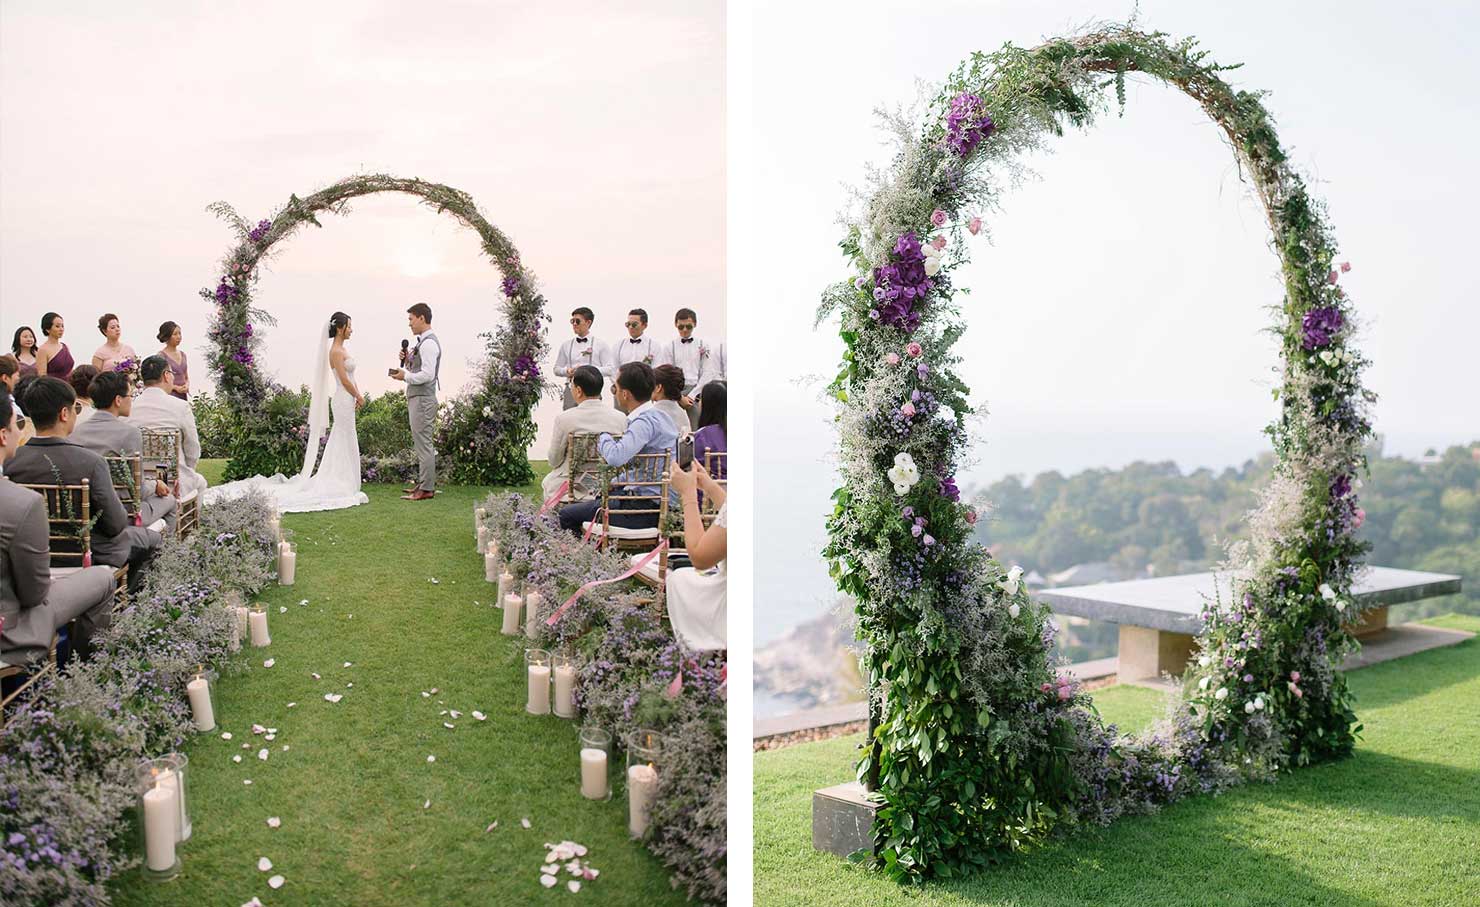 42 Unique Ways To Personalize Your Wedding Ceremony Ideas And